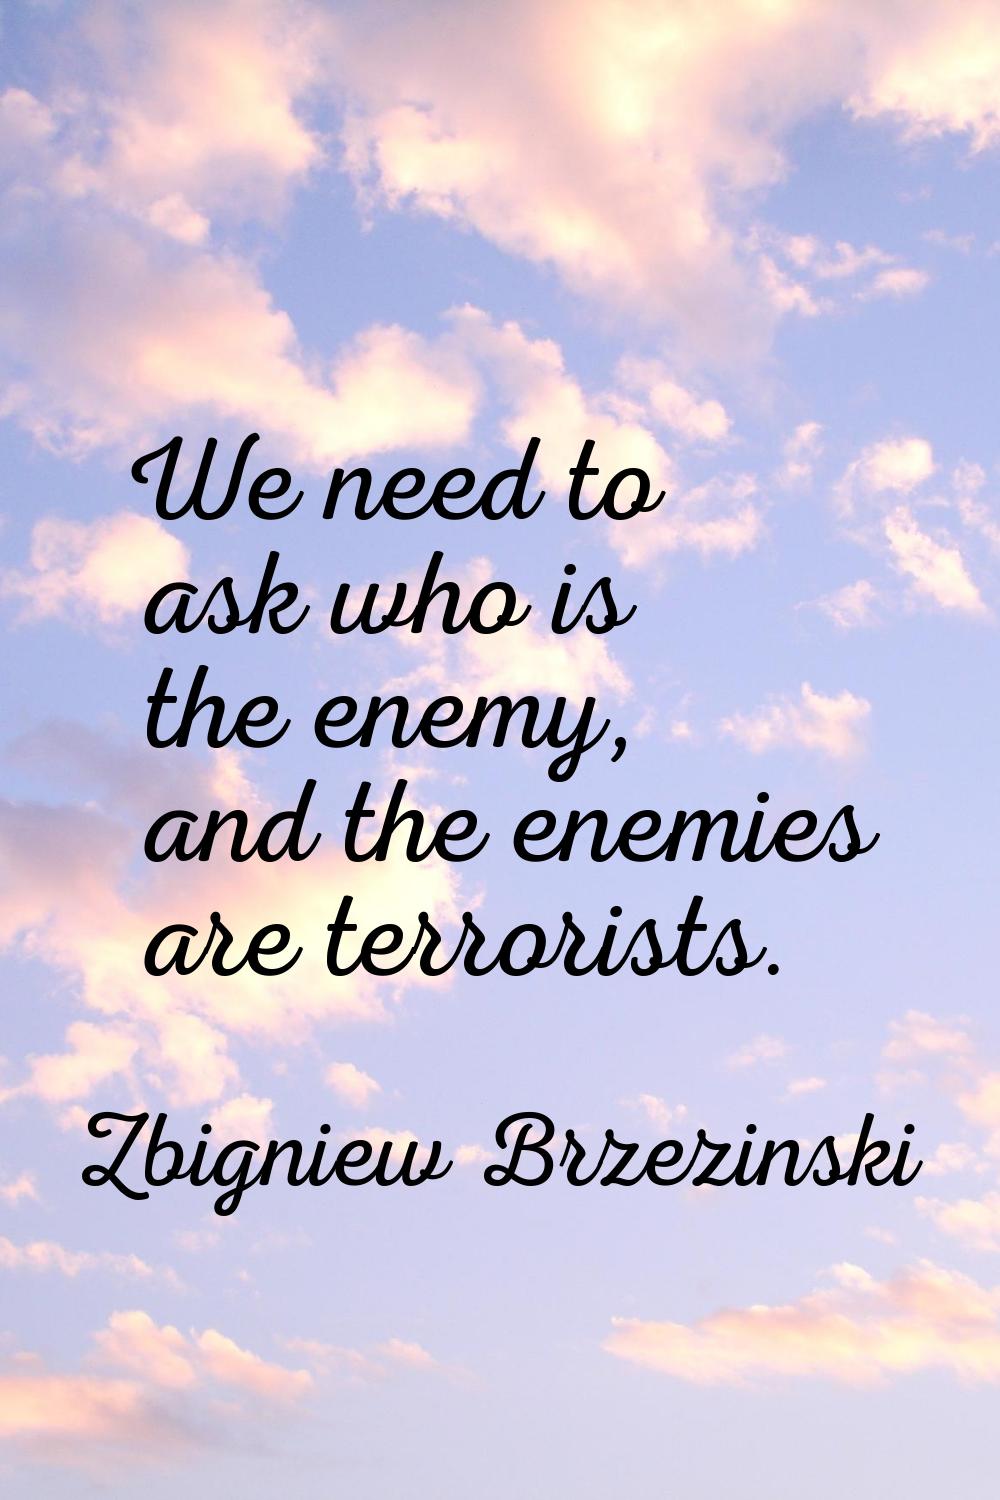 We need to ask who is the enemy, and the enemies are terrorists.